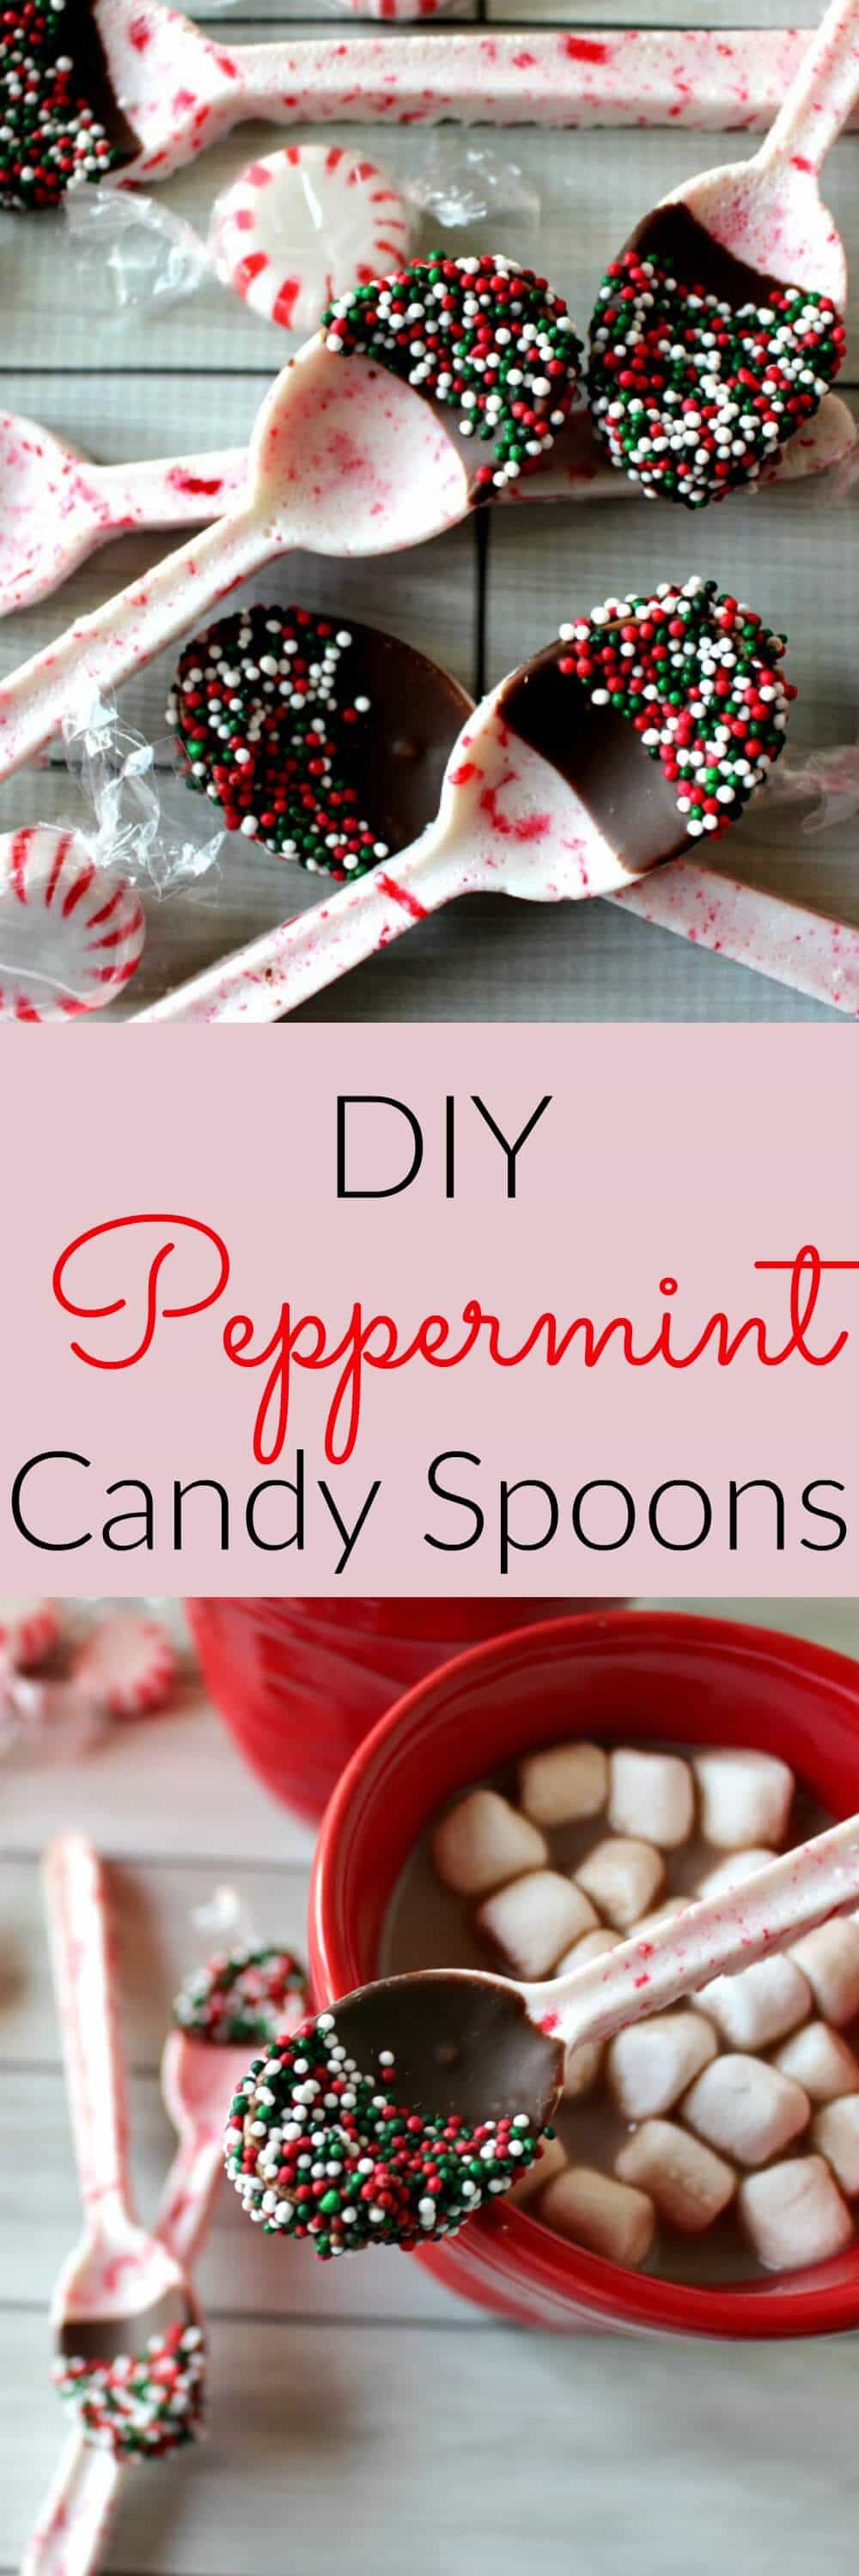 Easy DIY Christmas Gifts
 DIY Peppermint Candy Spoons Princess Pinky Girl